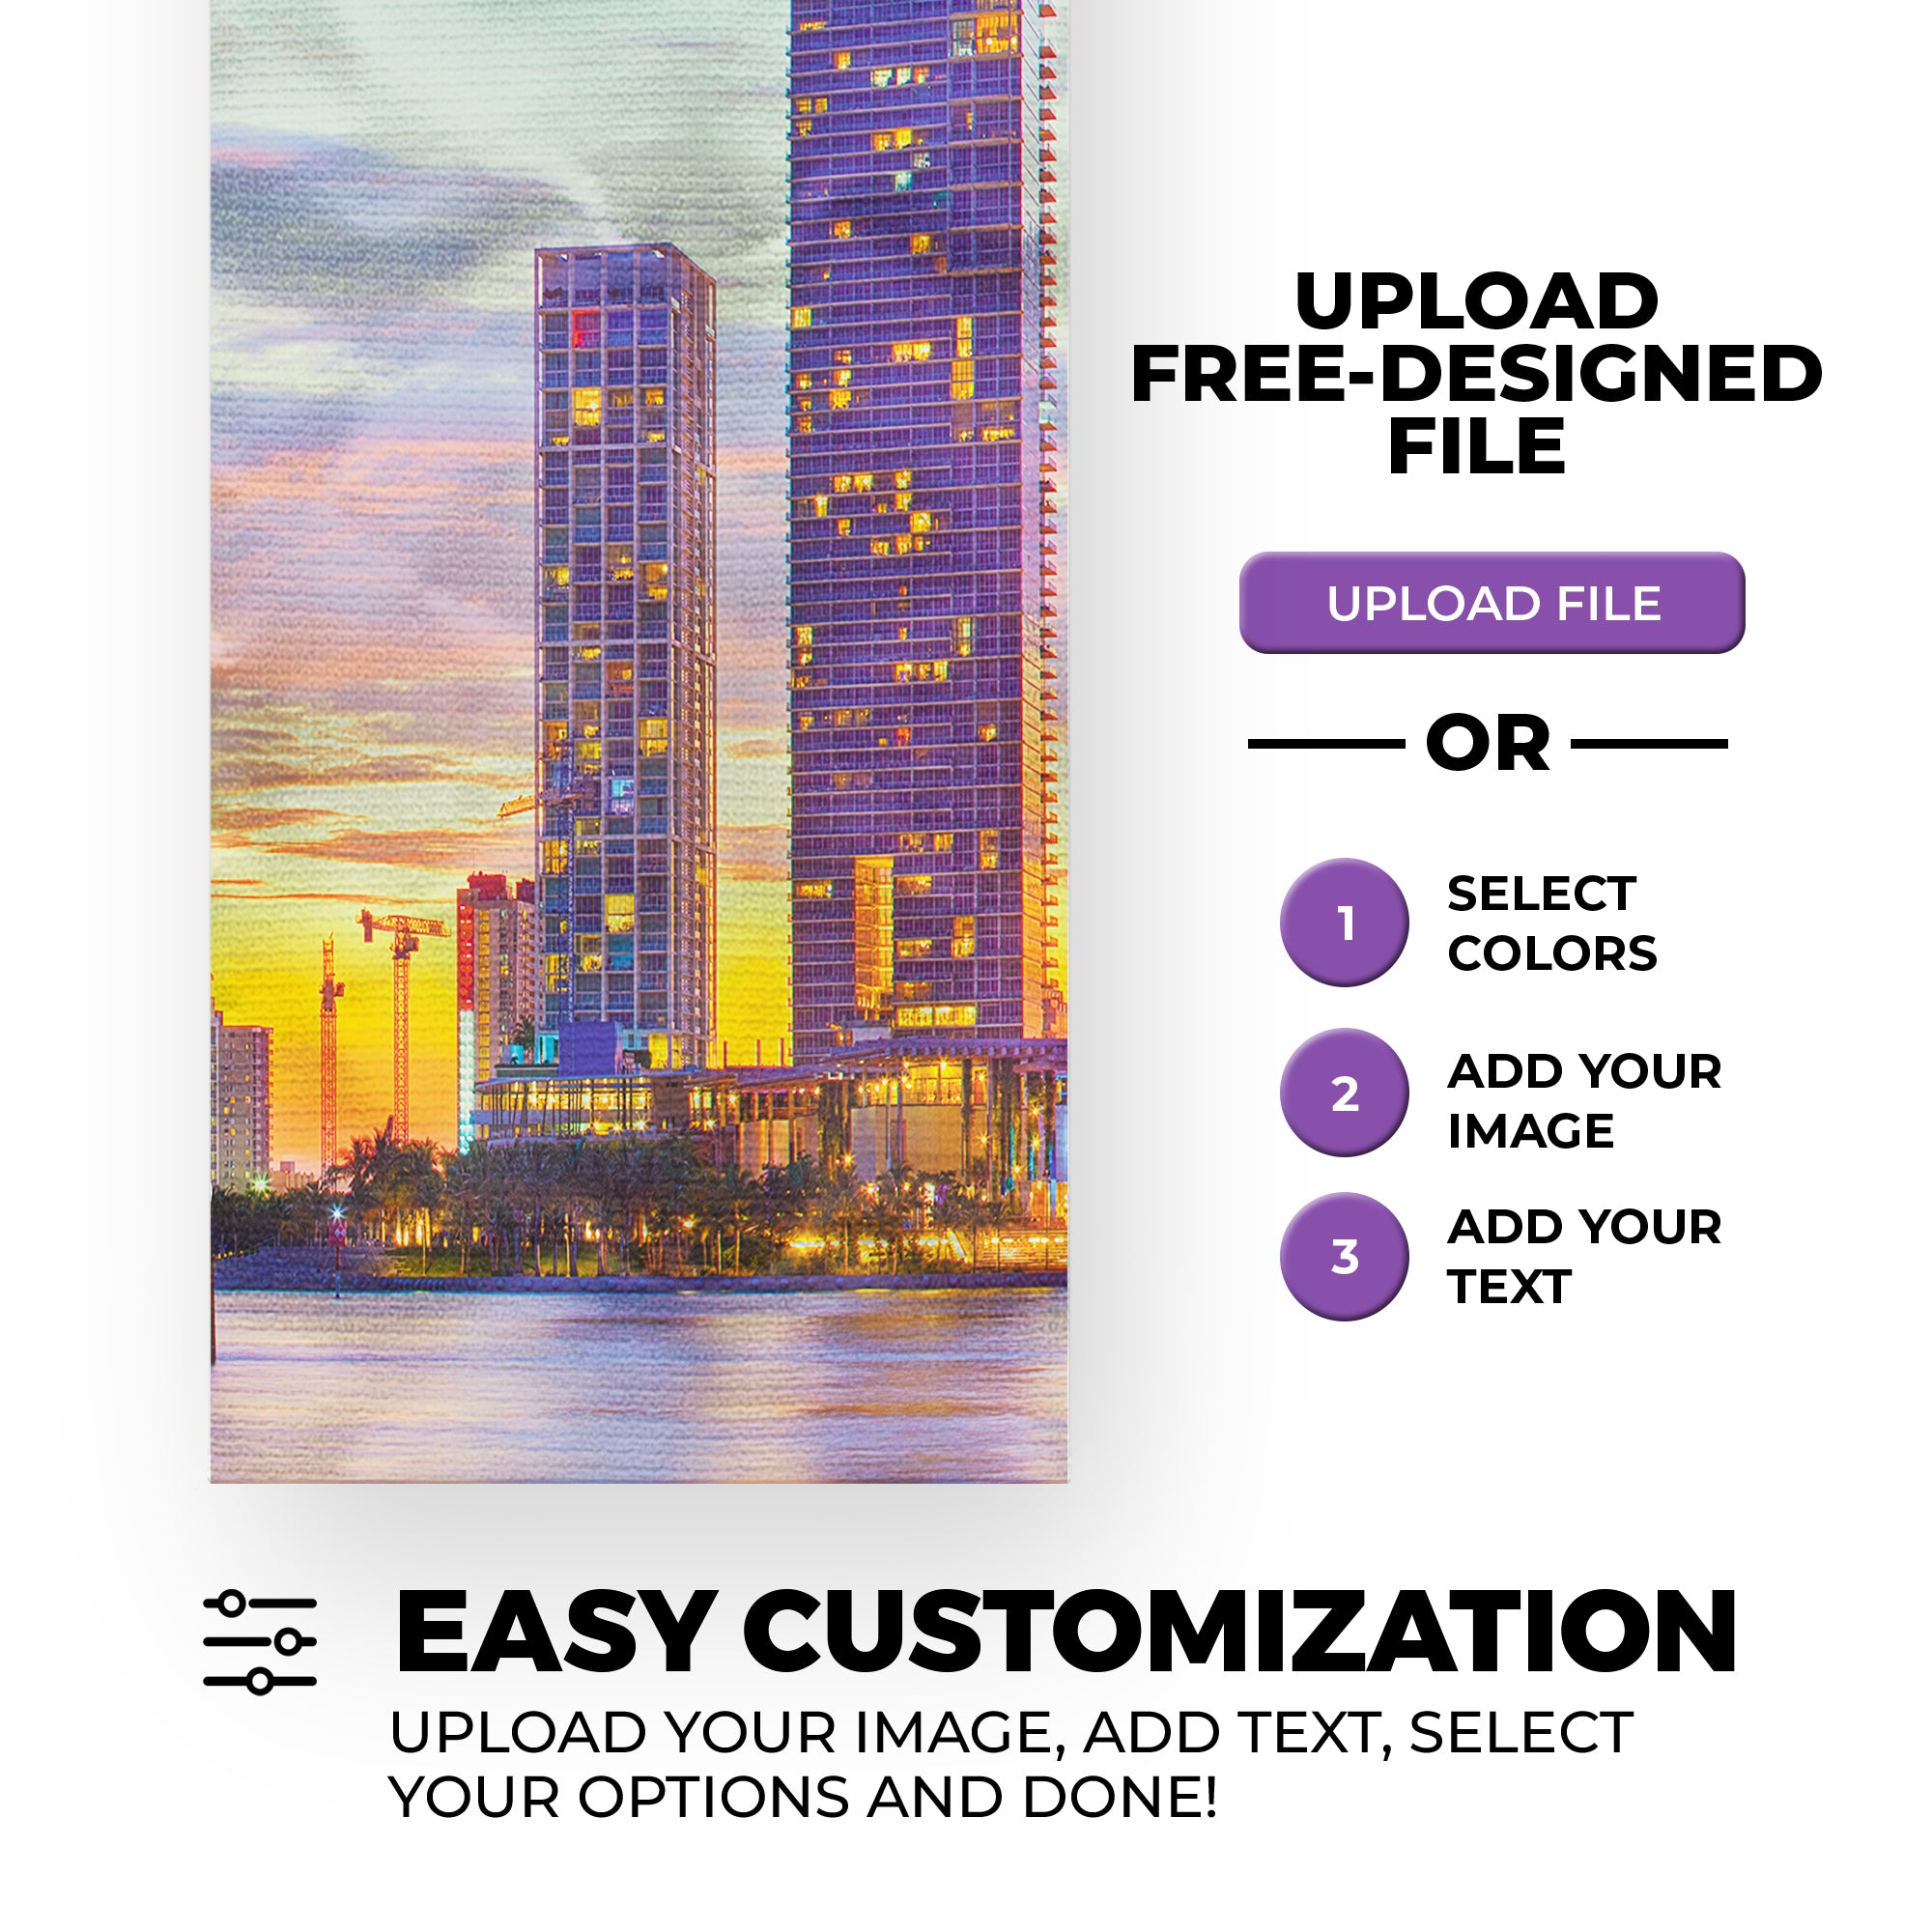 Miami Set of 3 Wall Banner